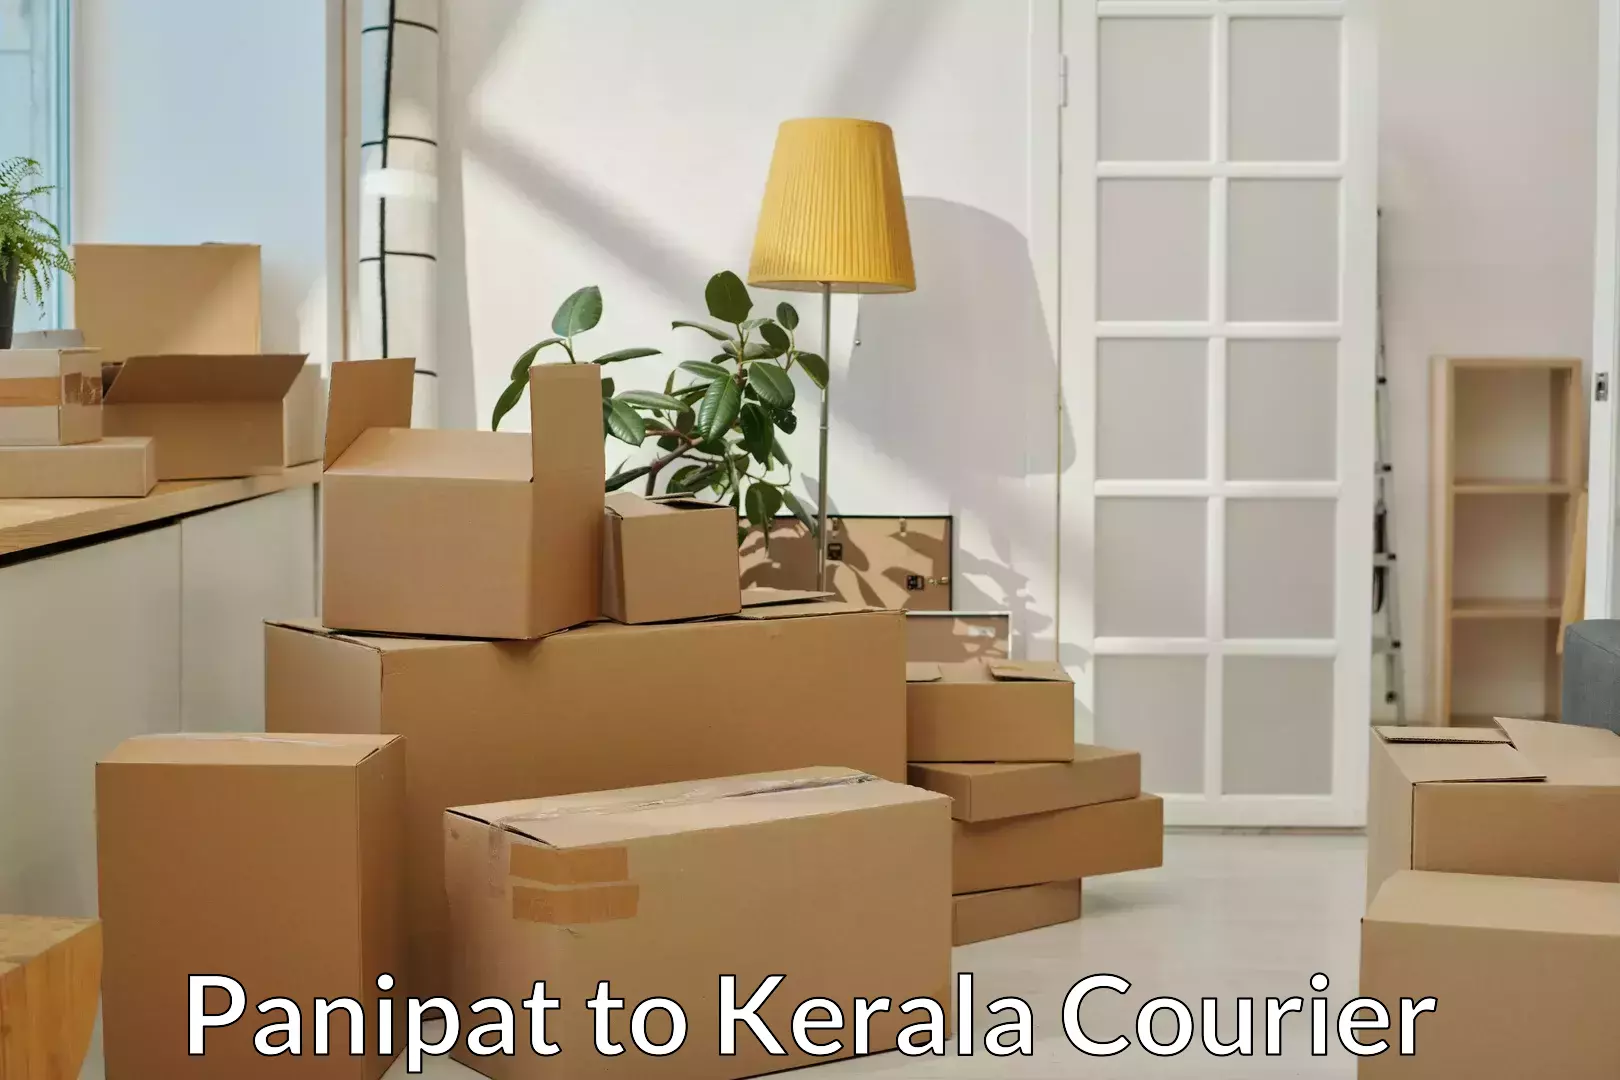 Furniture delivery service Panipat to Haripad